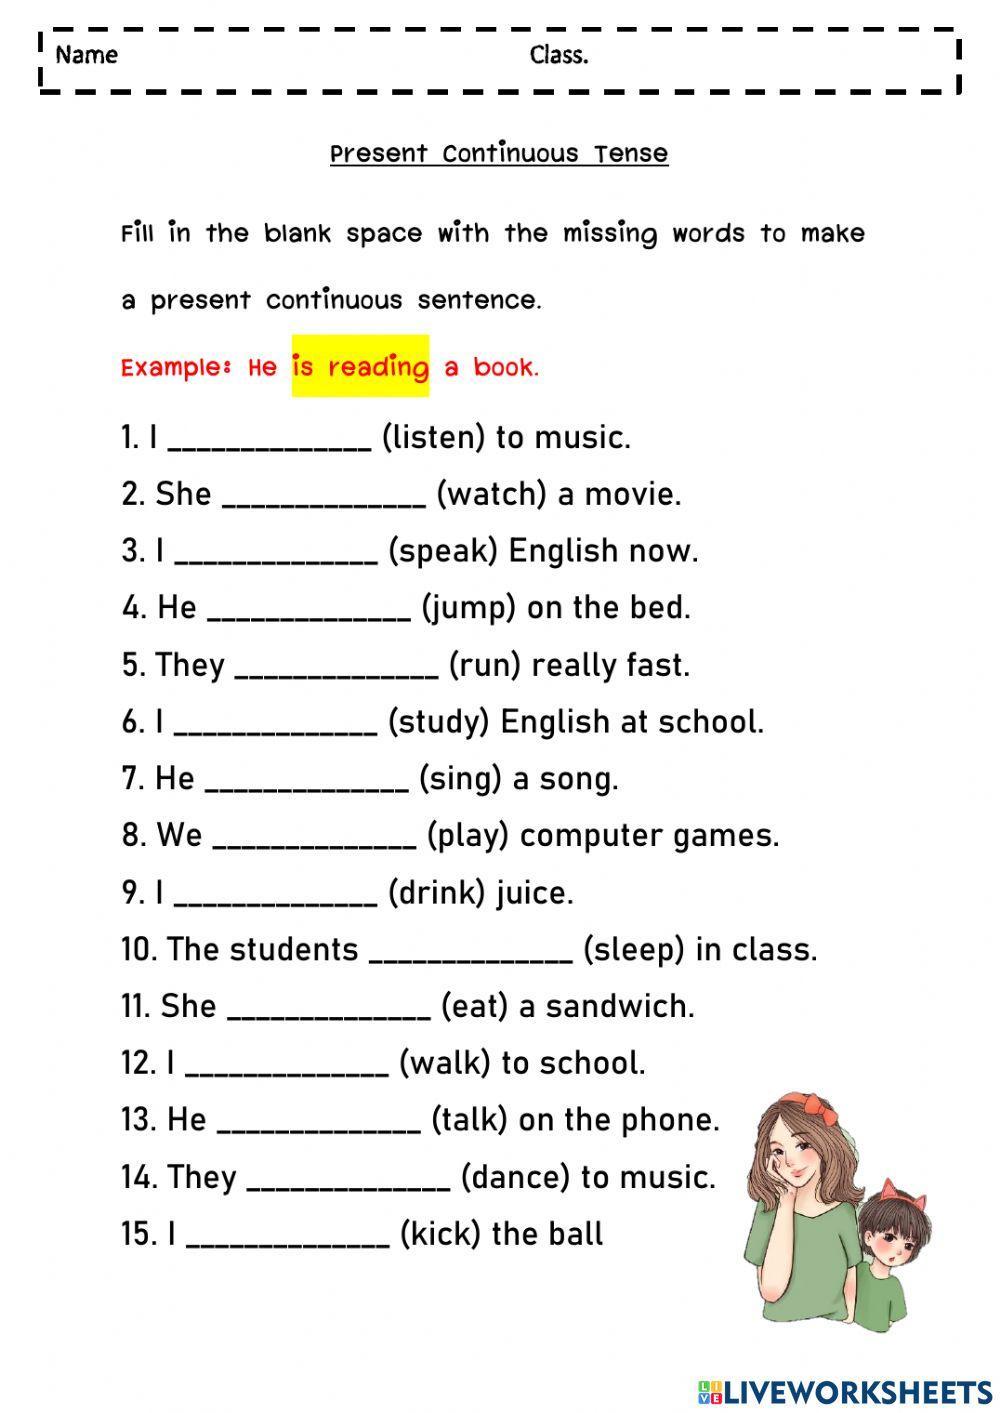 present-continuous-tense-activity-for-grade-7-9-live-worksheets